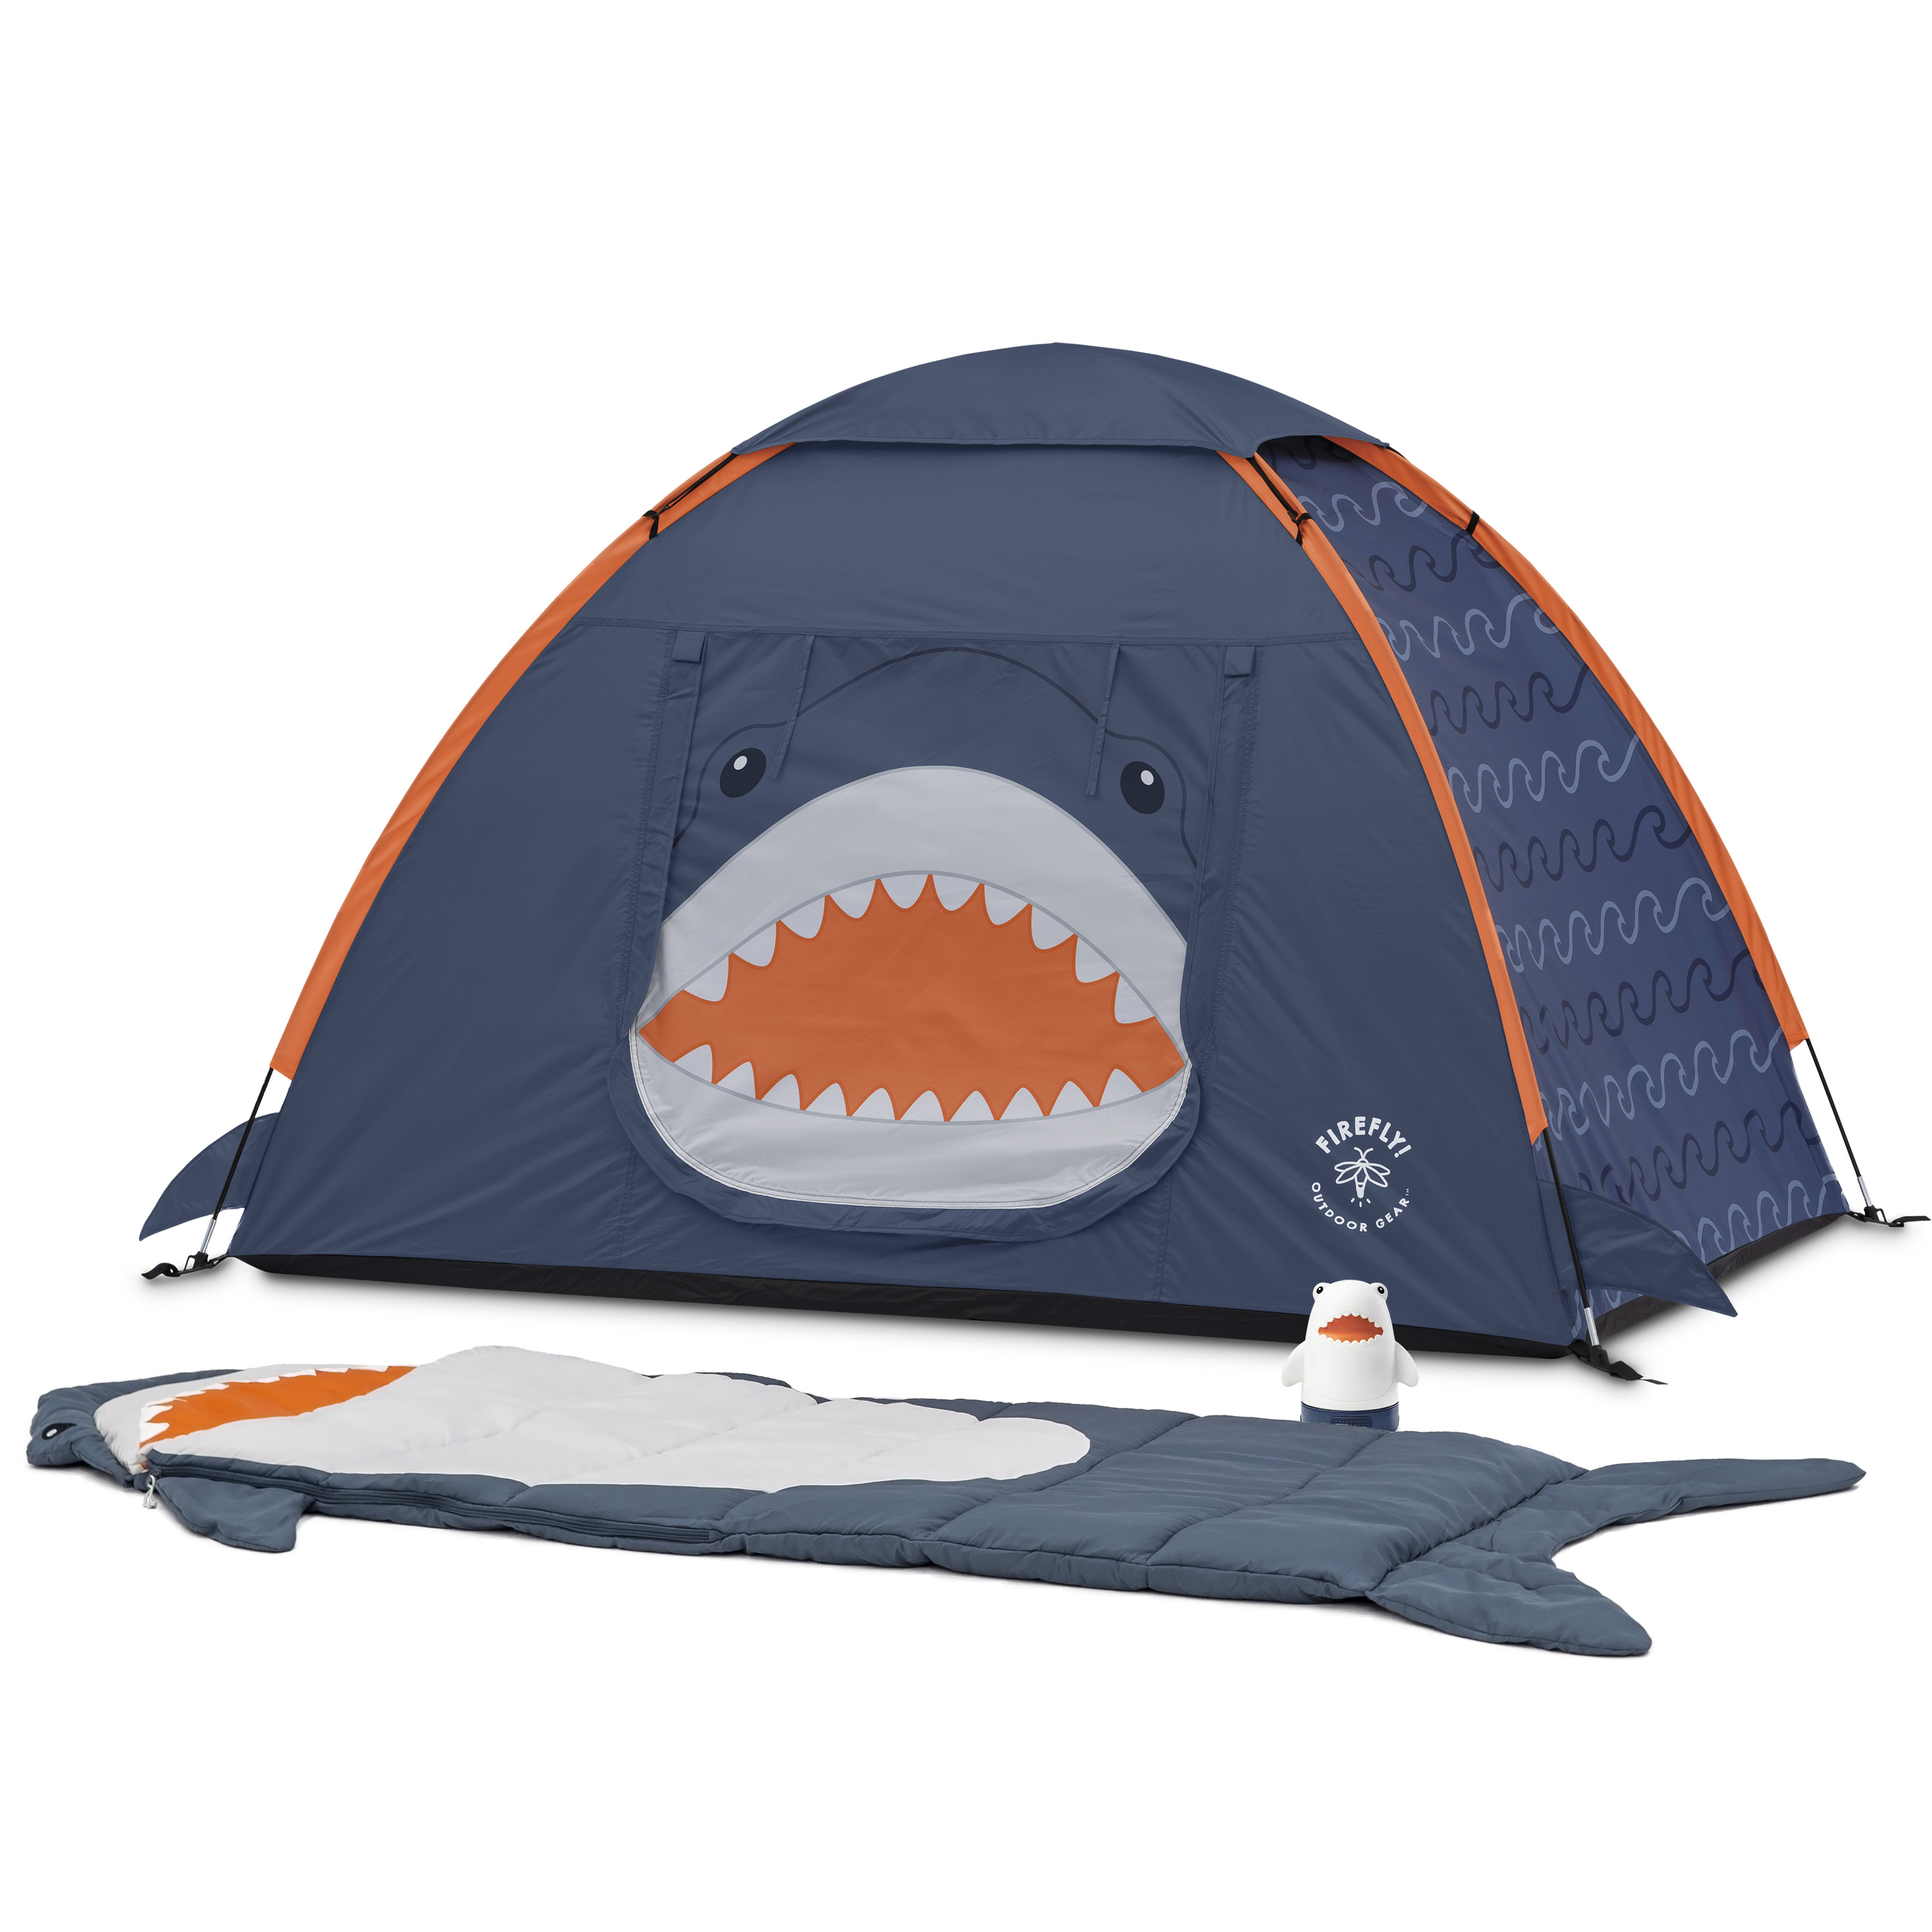 Firefly! Outdoor Gear Finn the Shark Kid's Camping Combo (One-Room Tent, Sleeping Bag, Lanter - image 1 of 30